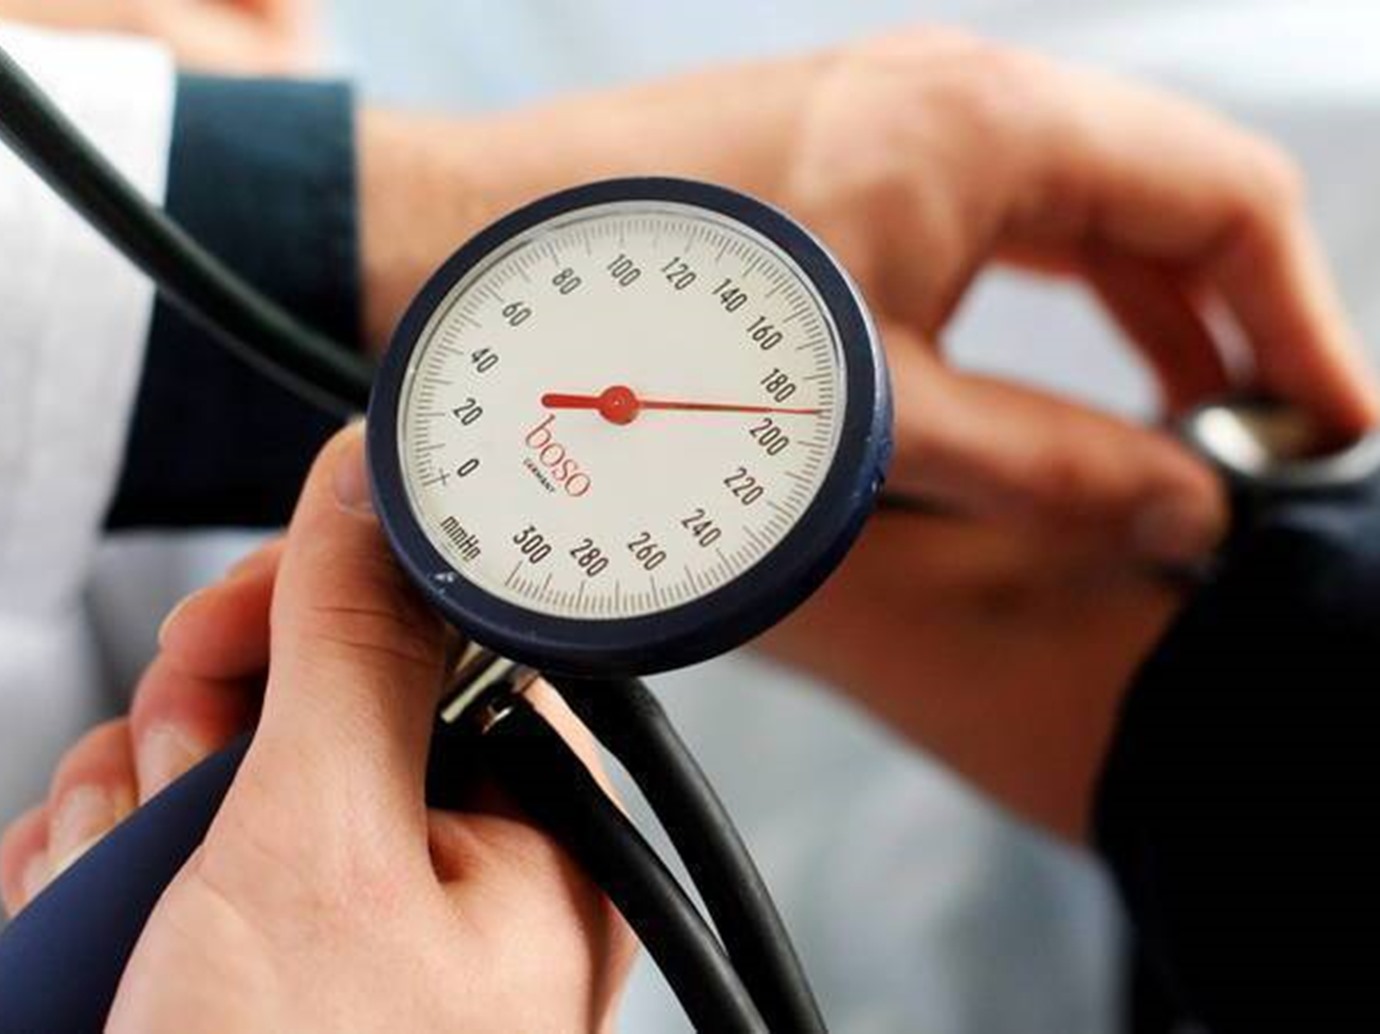 Additional causes for high blood pressure